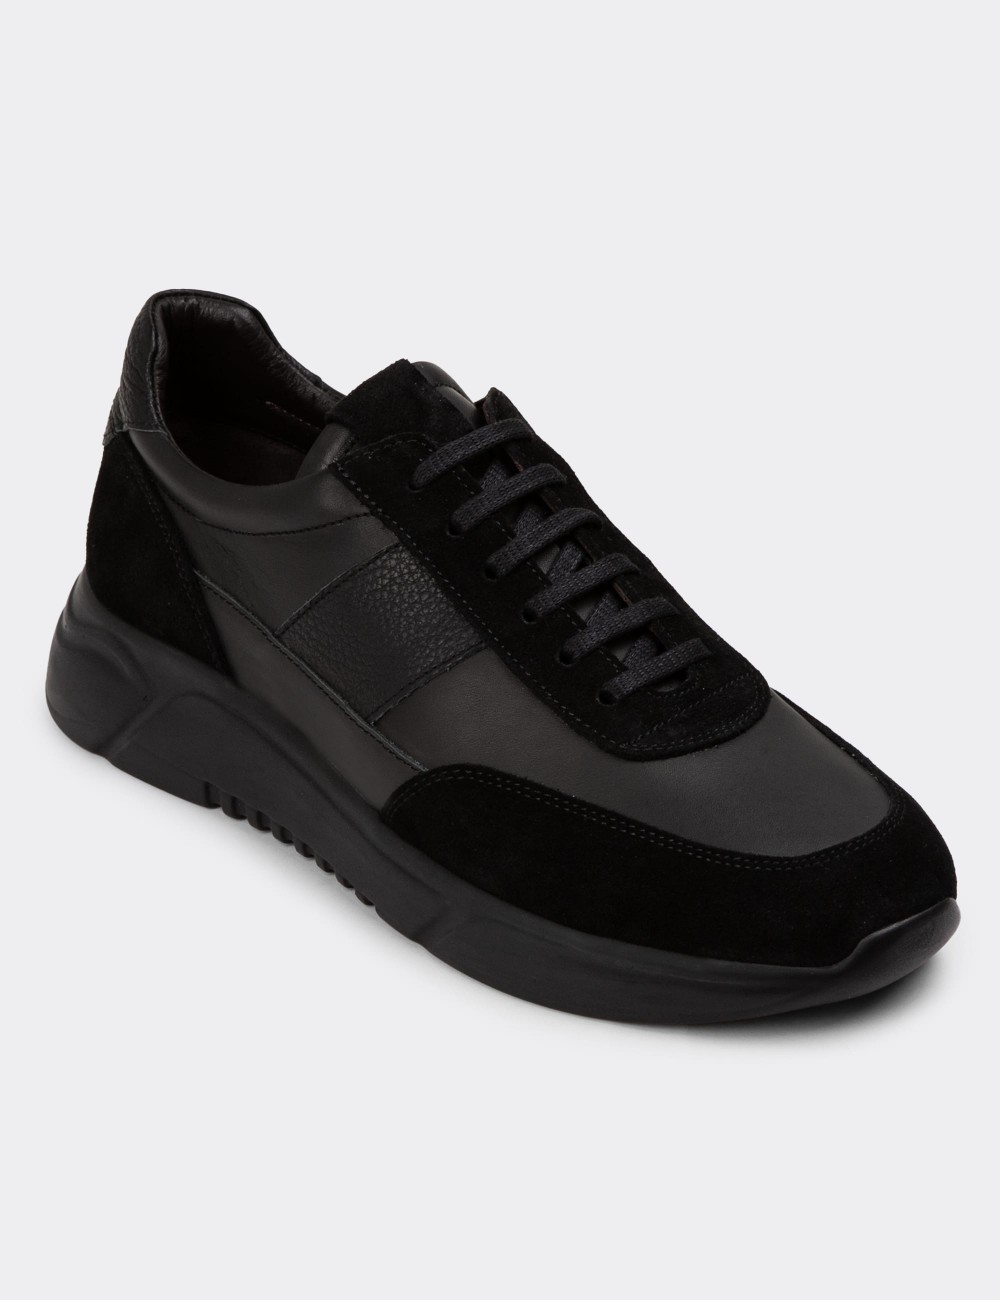 Black Suede Leather Sneakers - 01963MSYHE02